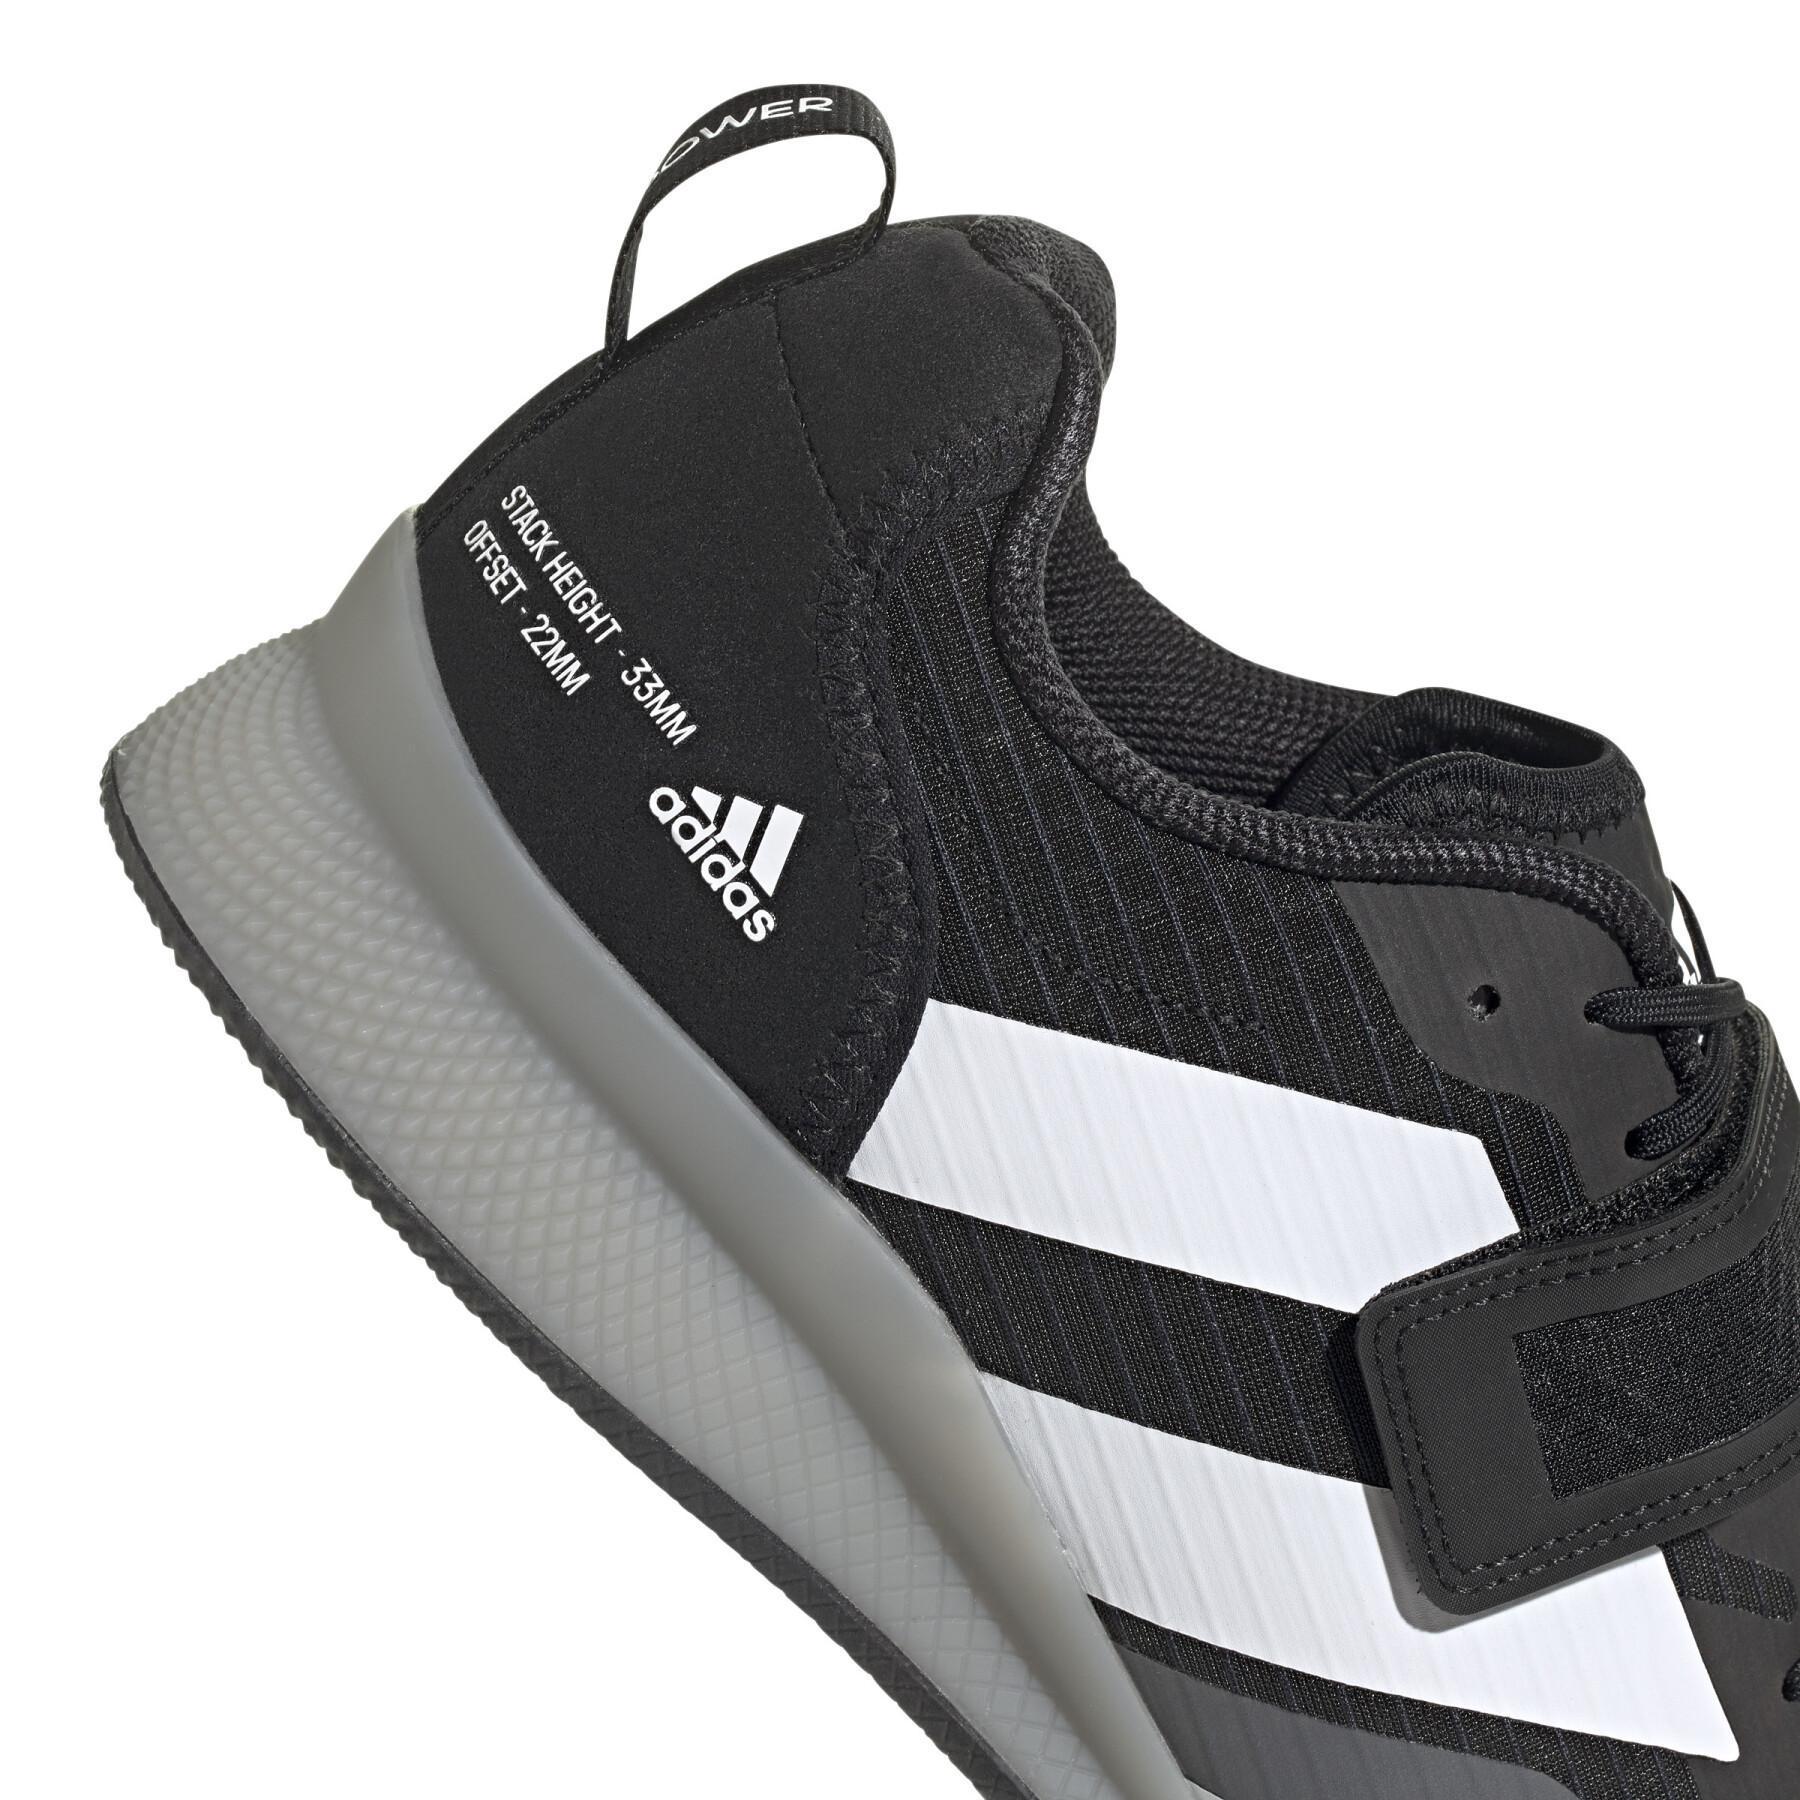 Weightlifting shoes adidas 220 Adipower 3